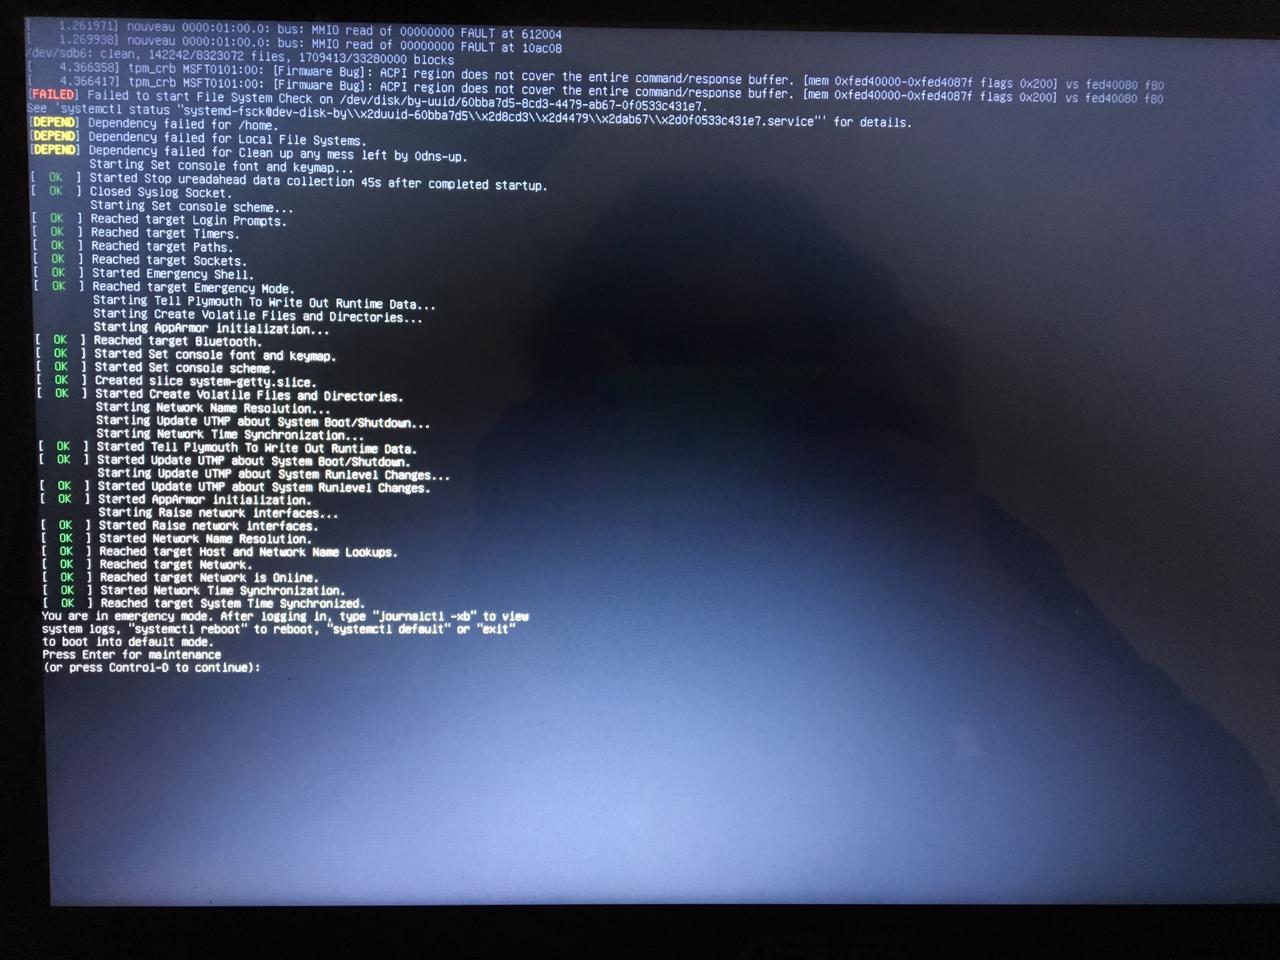 debian disable file system check on boot